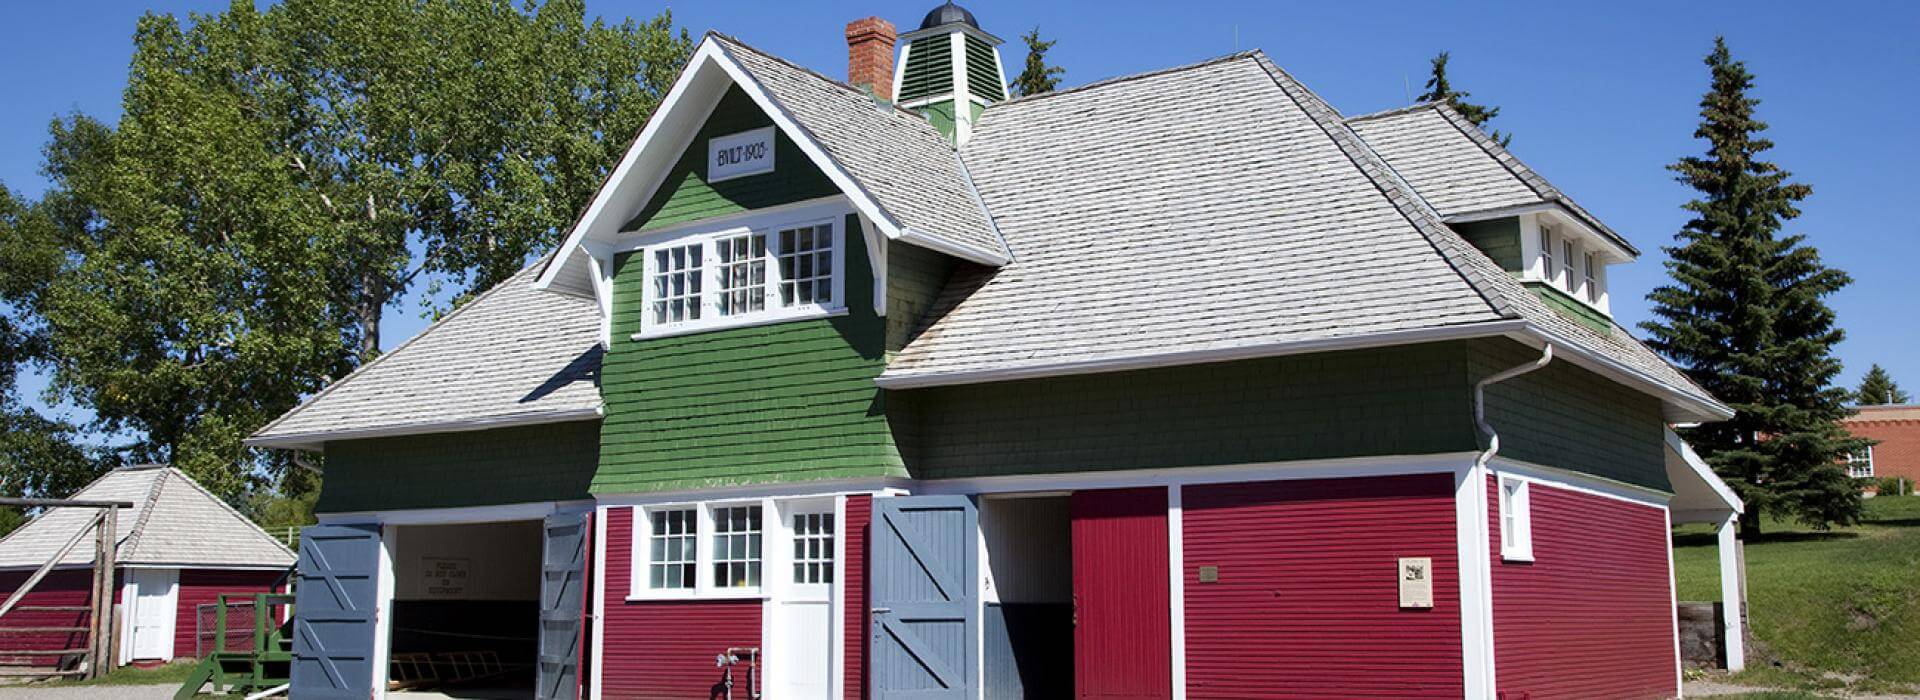 Hull Carriage House at Heritage Park 